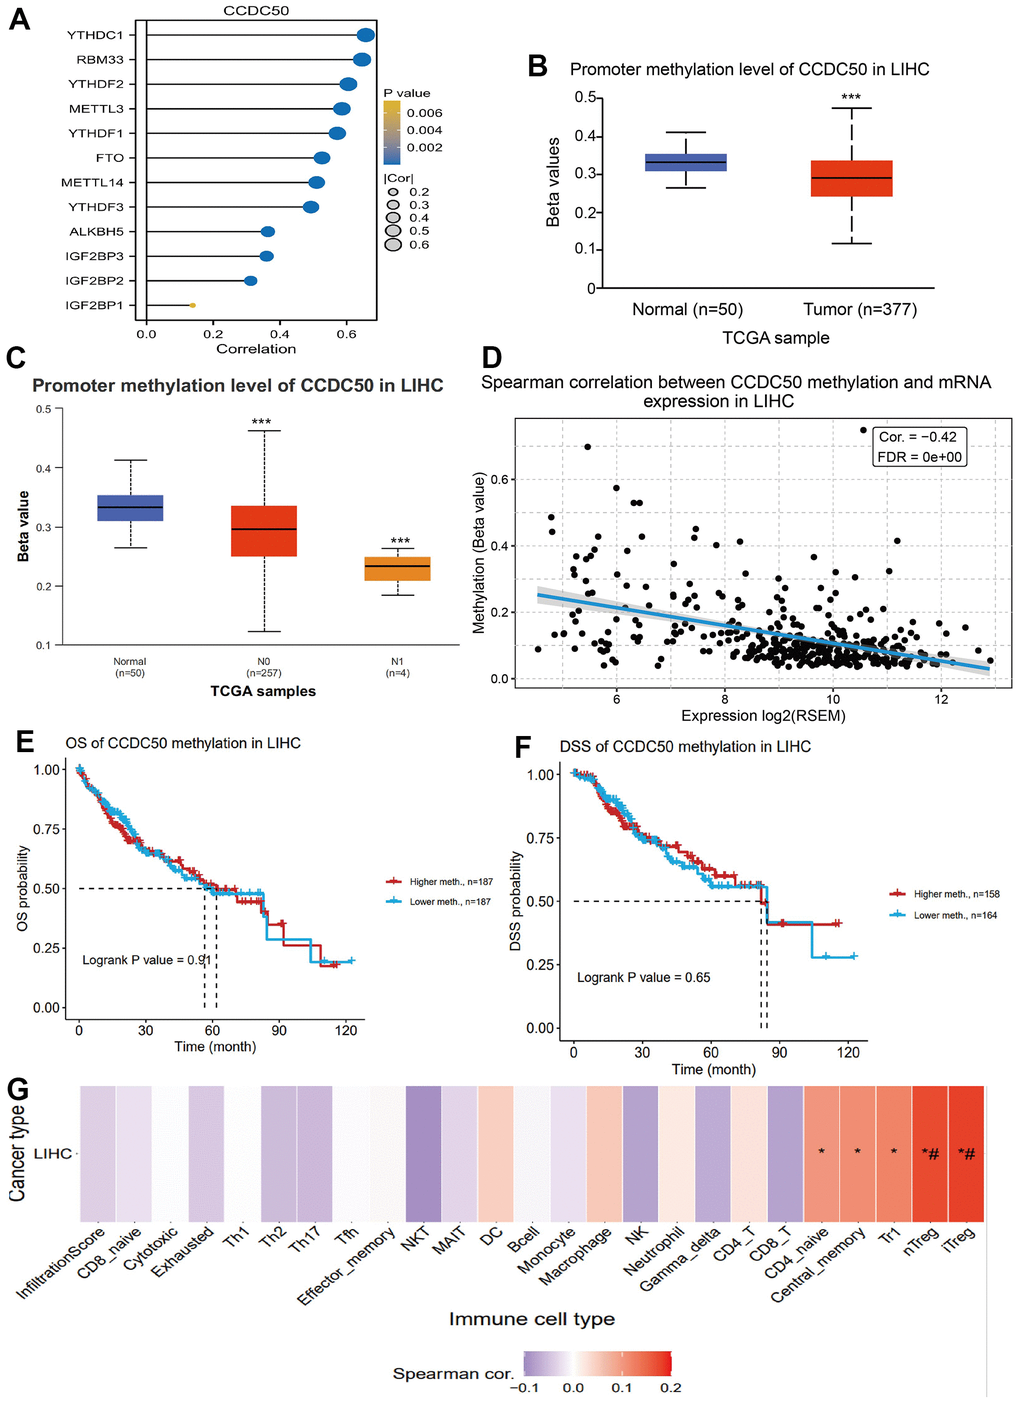 DNA and RNA methylation analysis of CCDC50 in HCC. (A) Correlation between m6A-related modulator genes and CCDC50 in LIHC. (B, C) The level of DNA methylation of CCDC50 in liver cancer tissue was significantly lower than that in normal liver tissue, and was negatively correlated with liver cancer metastasis. (D) The level of DNA methylation of CCDC50 was significantly negatively correlated with the expression of CCDC50 in HCC. (E, F) Correlation between DNA methylation of CCDC50 and prognosis in LIHC. (G) Correlation between DNA methylation of CCDC50 and the level of immune cell infiltration in LIHC. RSEM is a software for quantifying gene expression based on STAR sequence comparison. ns, p > 0.05; *p 